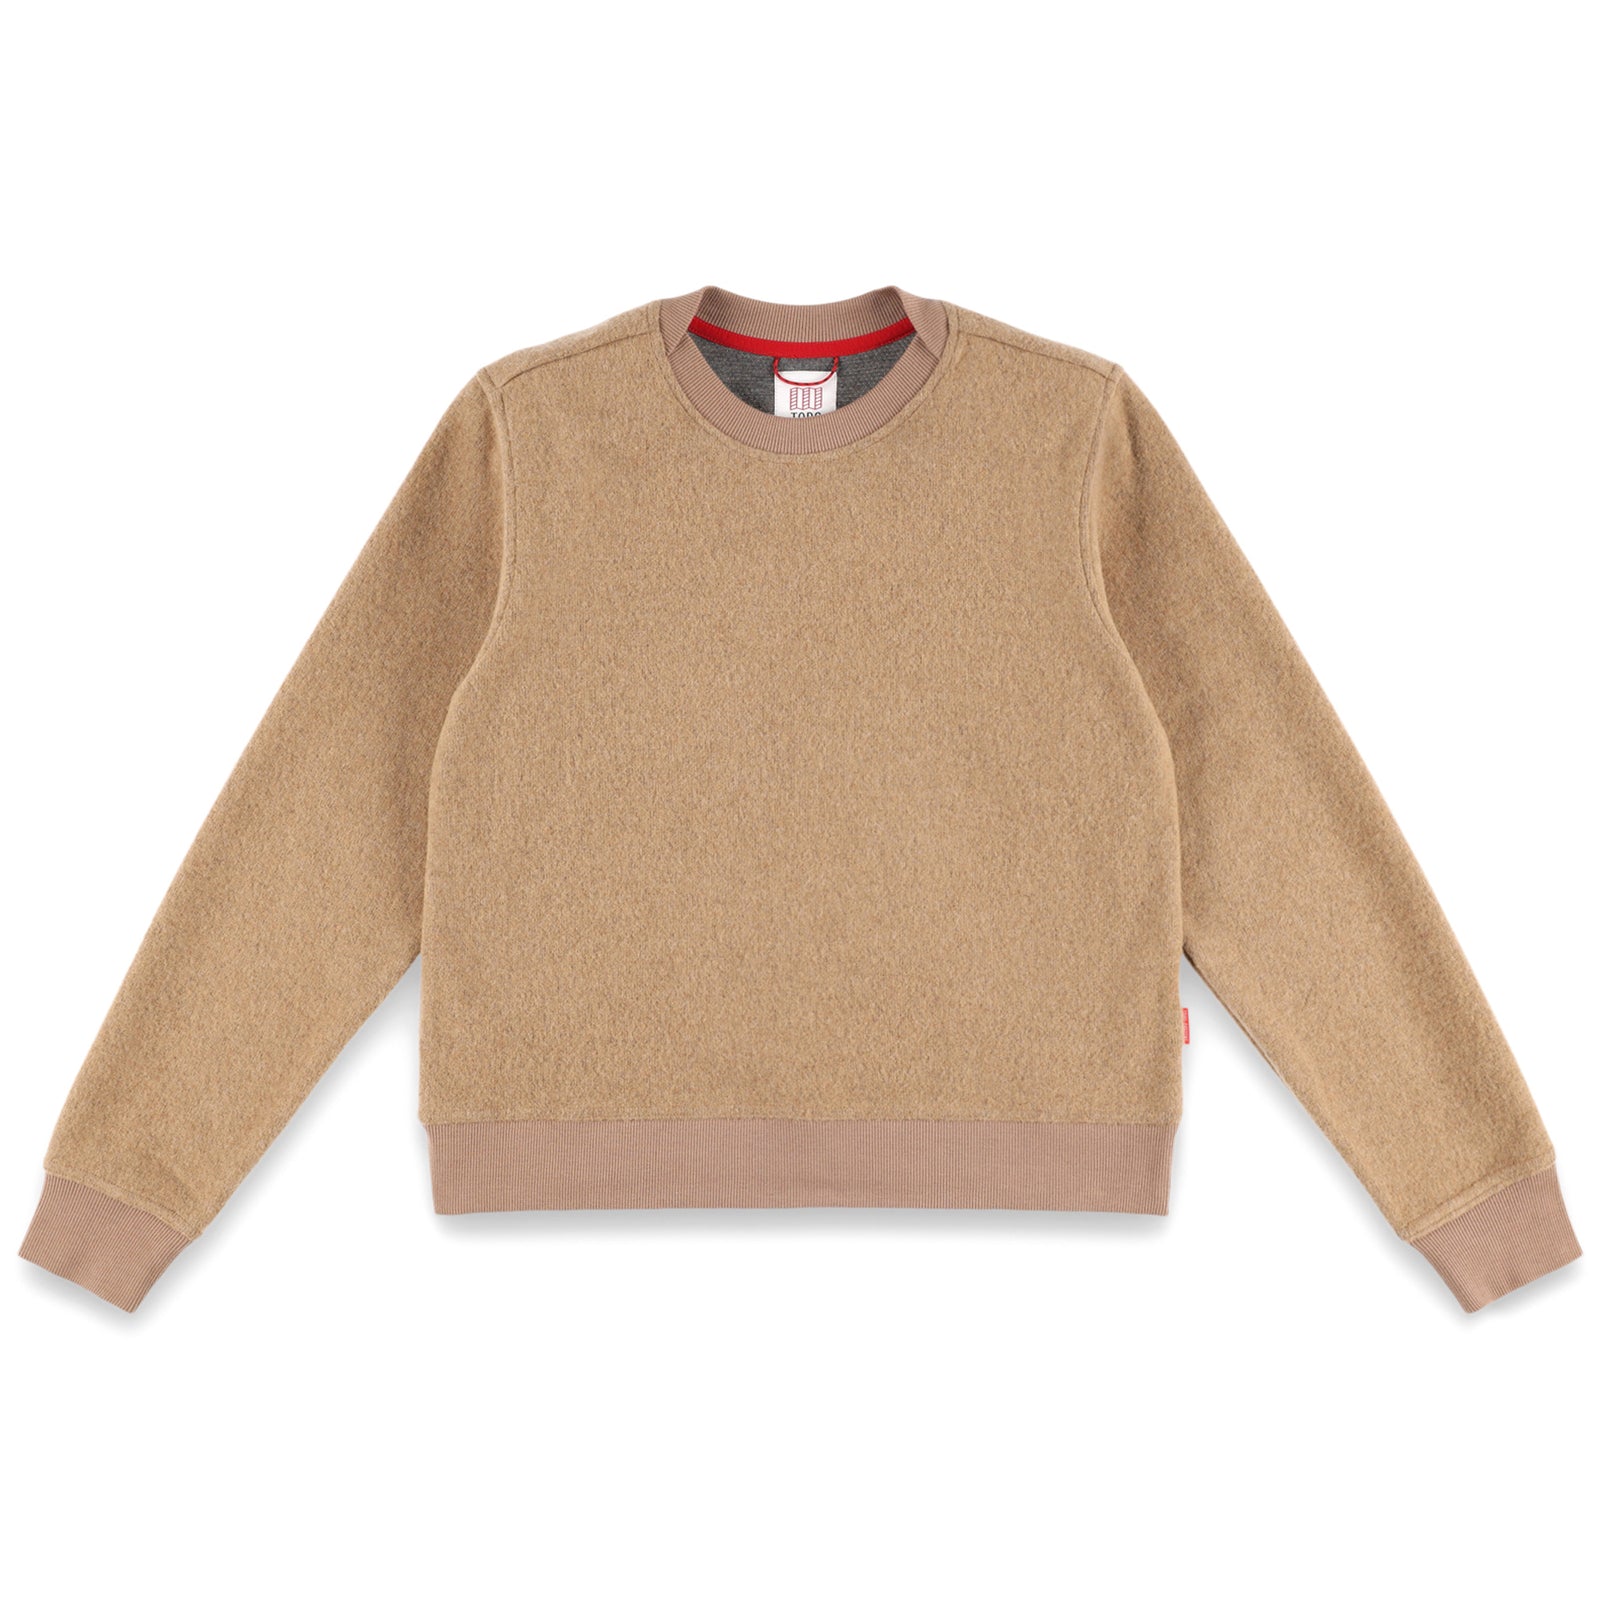 Topo Designs Women's Global Sweater recycled Italian wool crewneck pullover in "Camel" brown